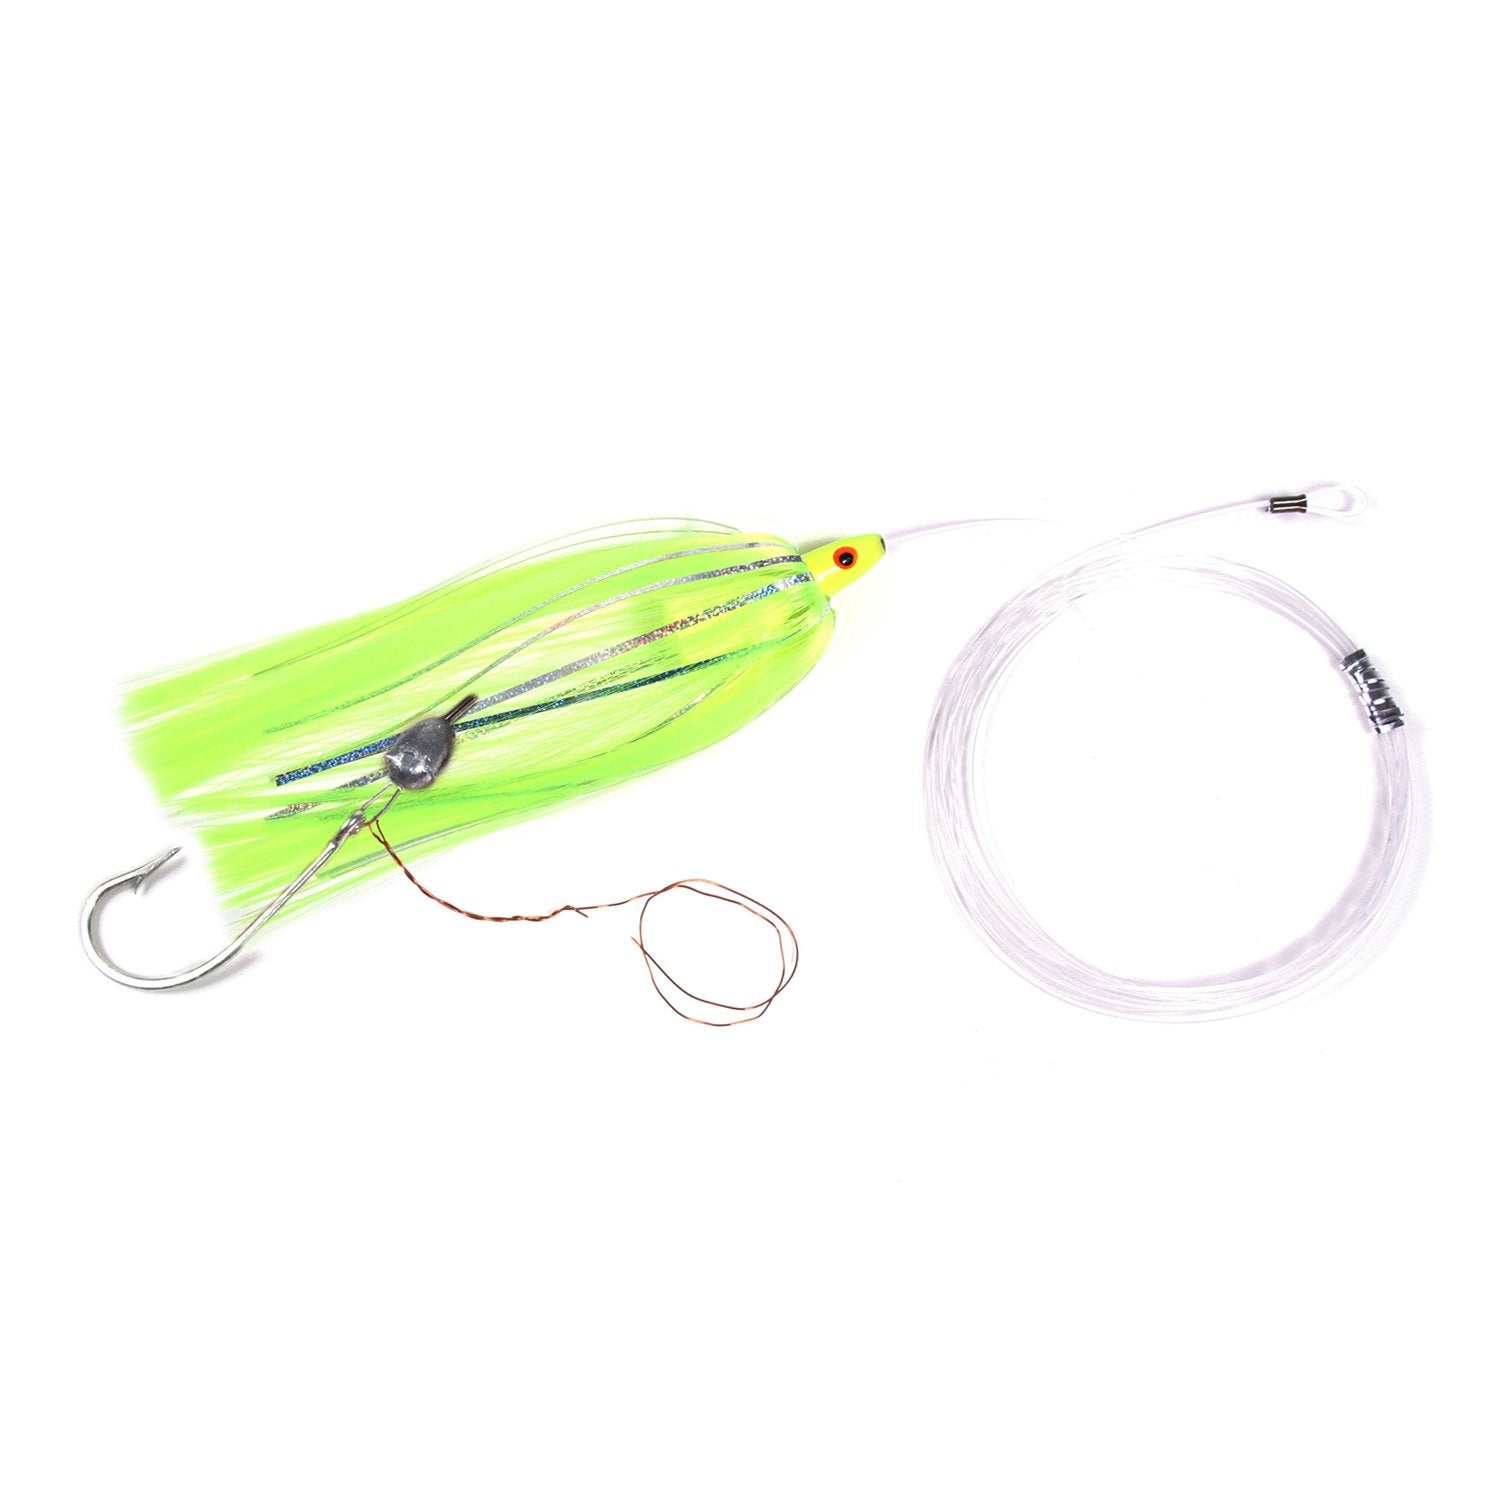 How too build & Rig a Green Machine style lure. #offshore #trolling #lures  BetterthanBought 